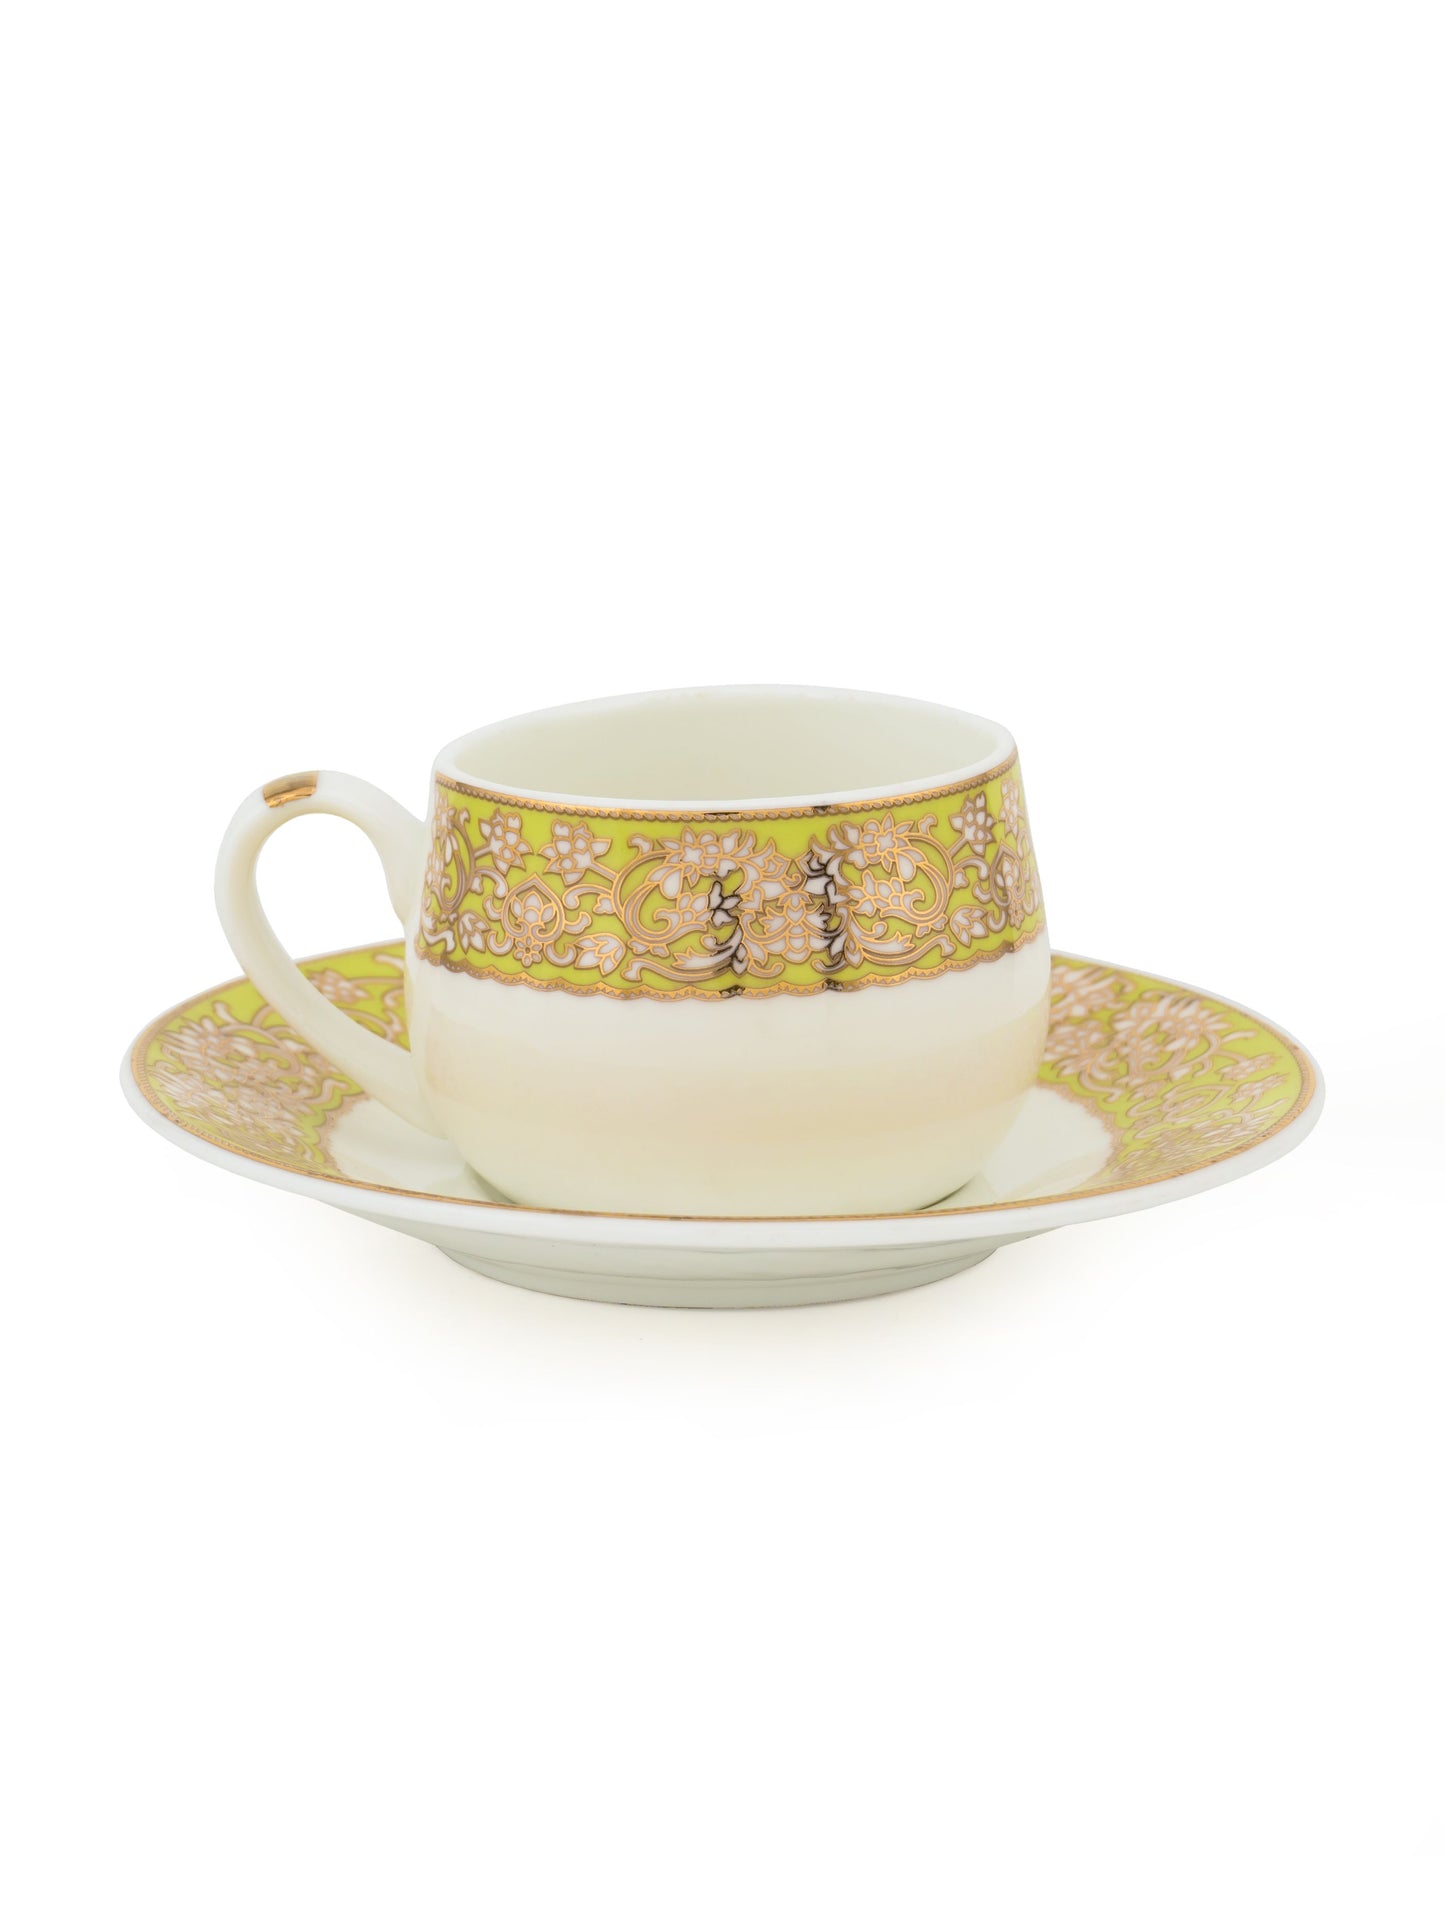 JCPL Coral Aroma Cup & Saucer, 145ml, Set of 12 (6 Cups + 6 Saucers) (AS1)